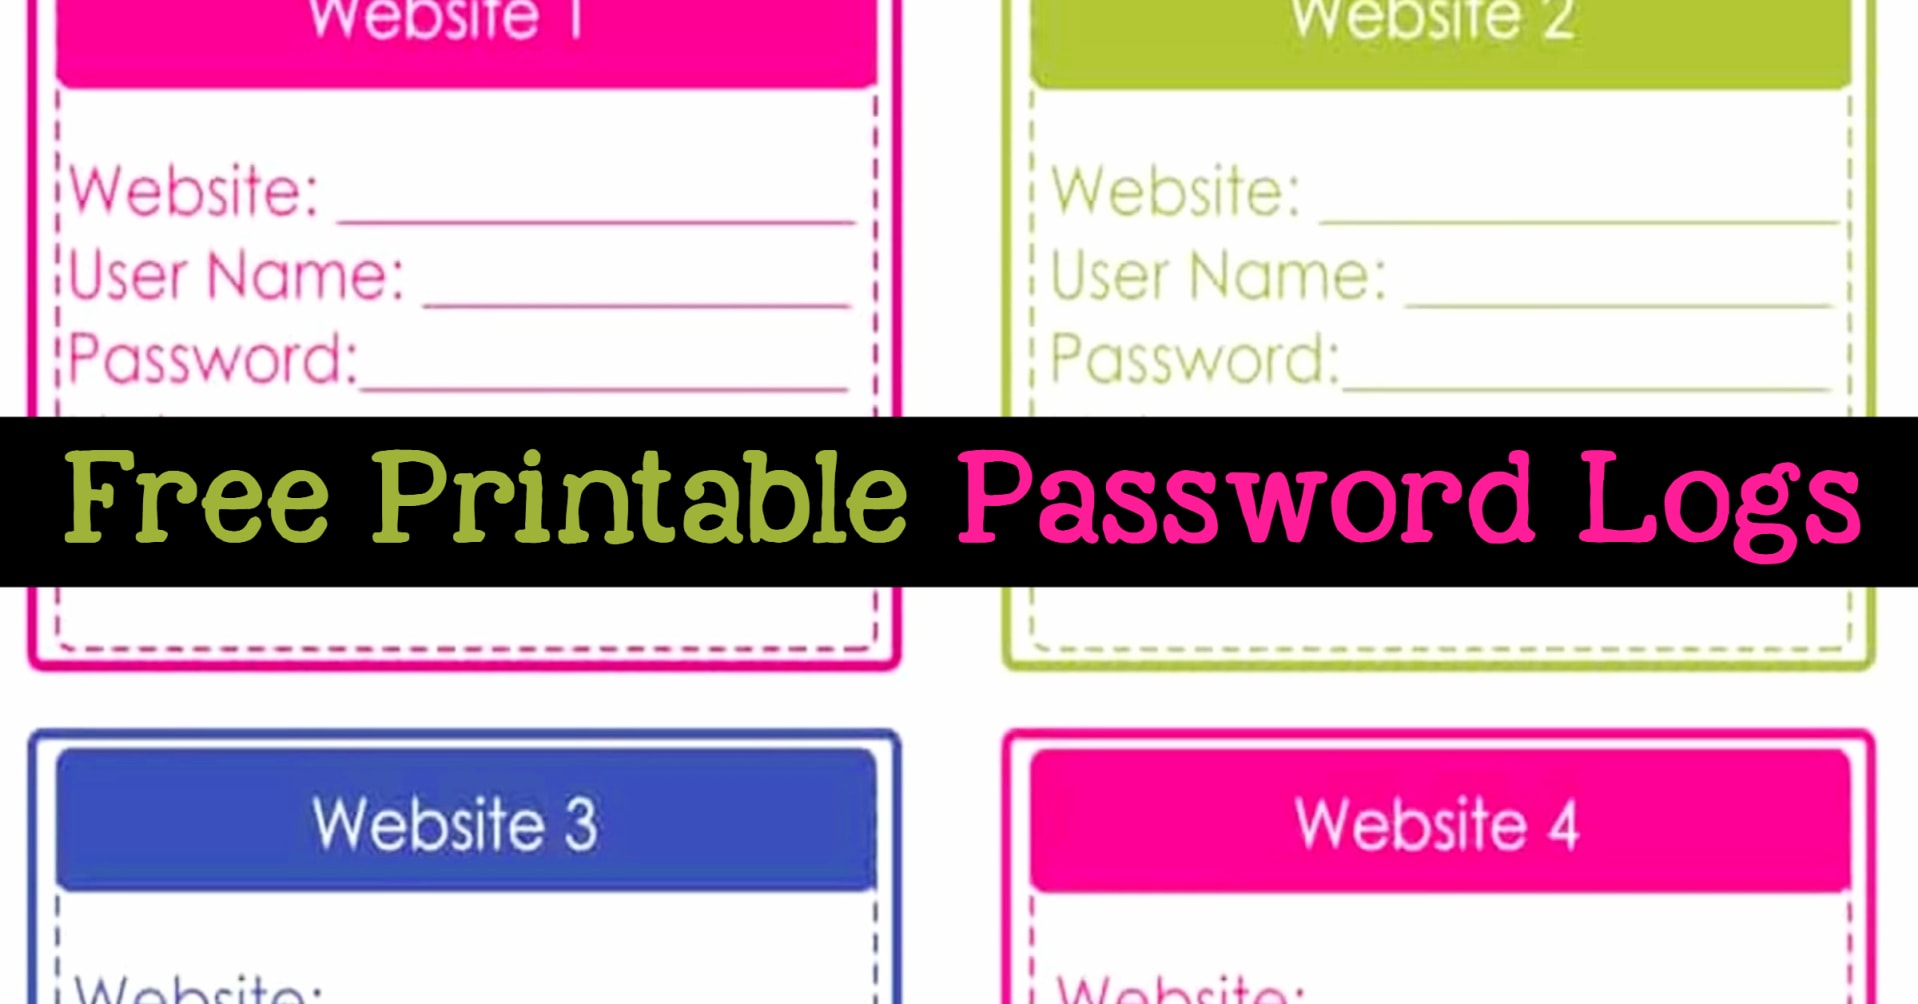 Free Password Logs, Trackers and Password Keeper Printable PDFs - how to organize website passwords on paper with a printable password keeper to make a DIY password journal or password organizer binder - it's like your own password vault to track all your online passwords!  Download your free printable password organizers worksheets to make a DIY password book with these free home organizing printables